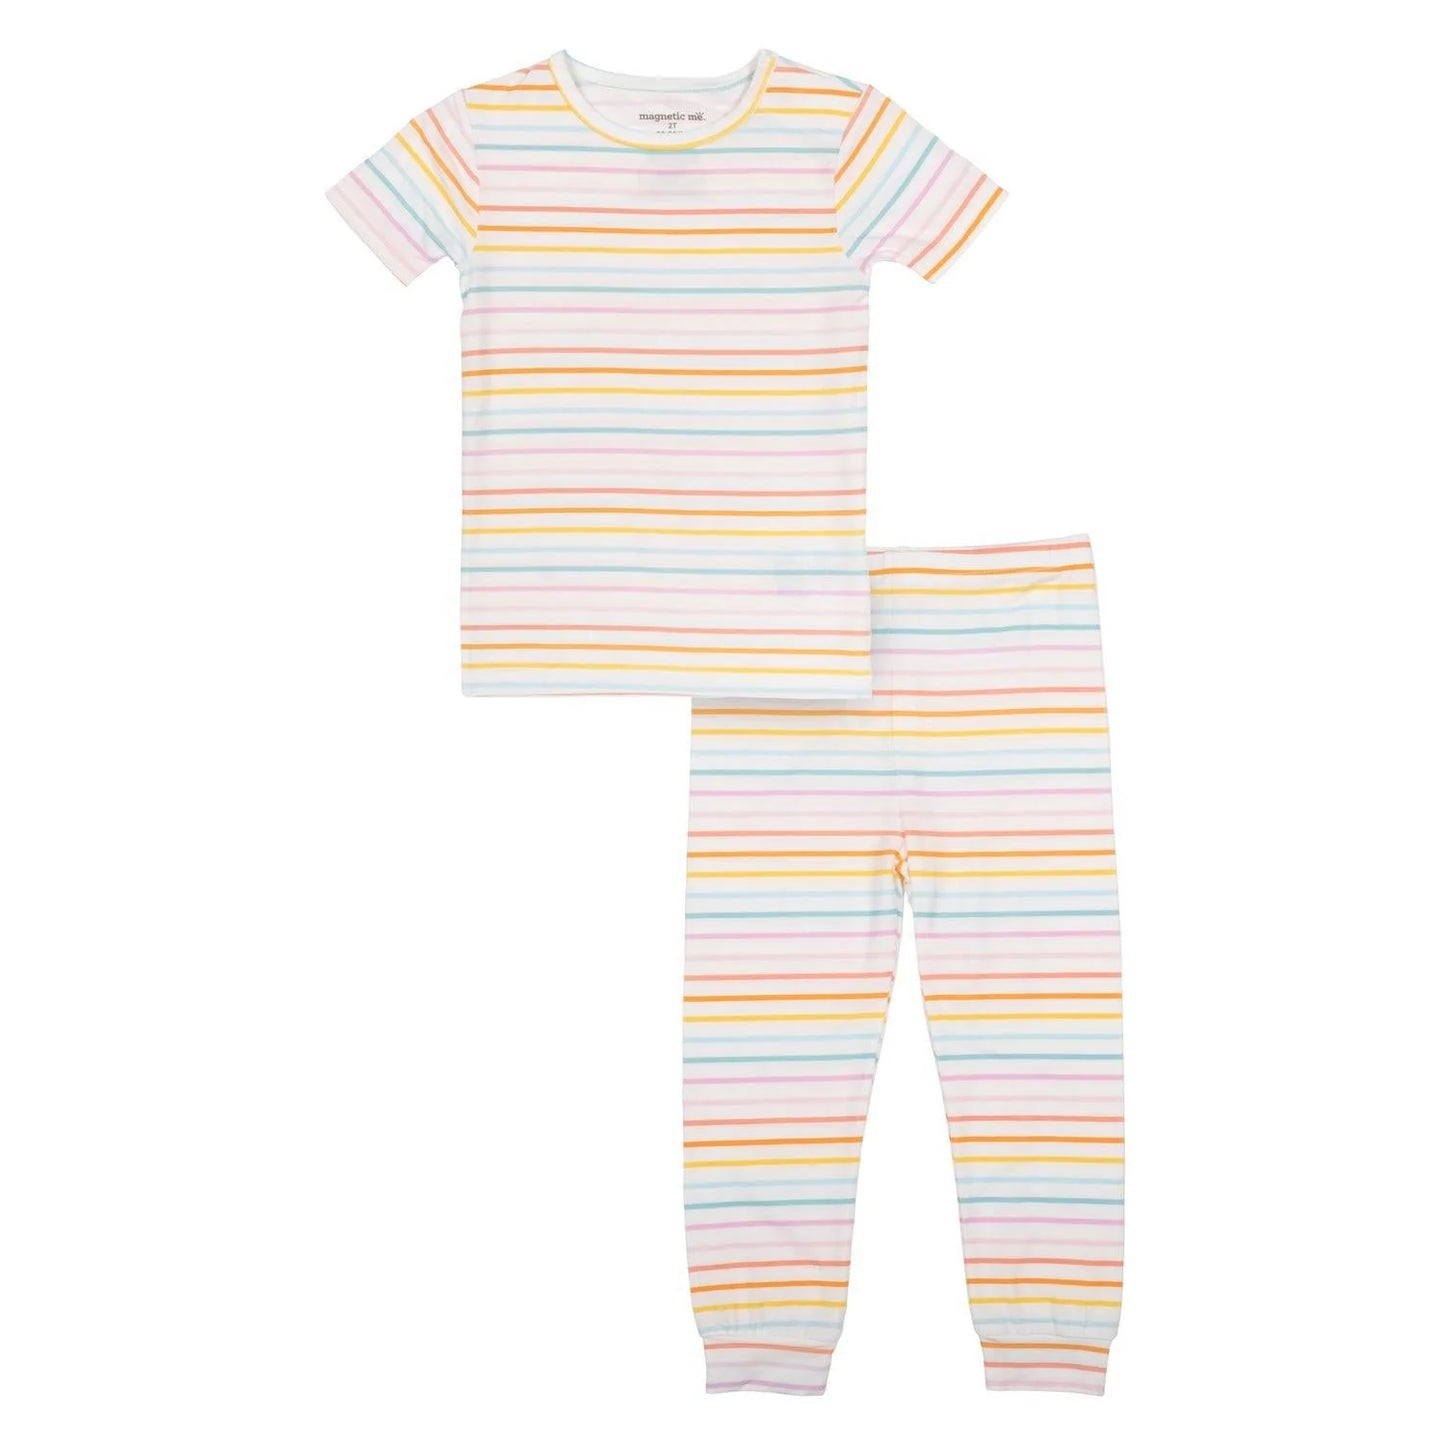 2 Piece Pajama (Short Sleeve) - Candy Stripe Magnetic